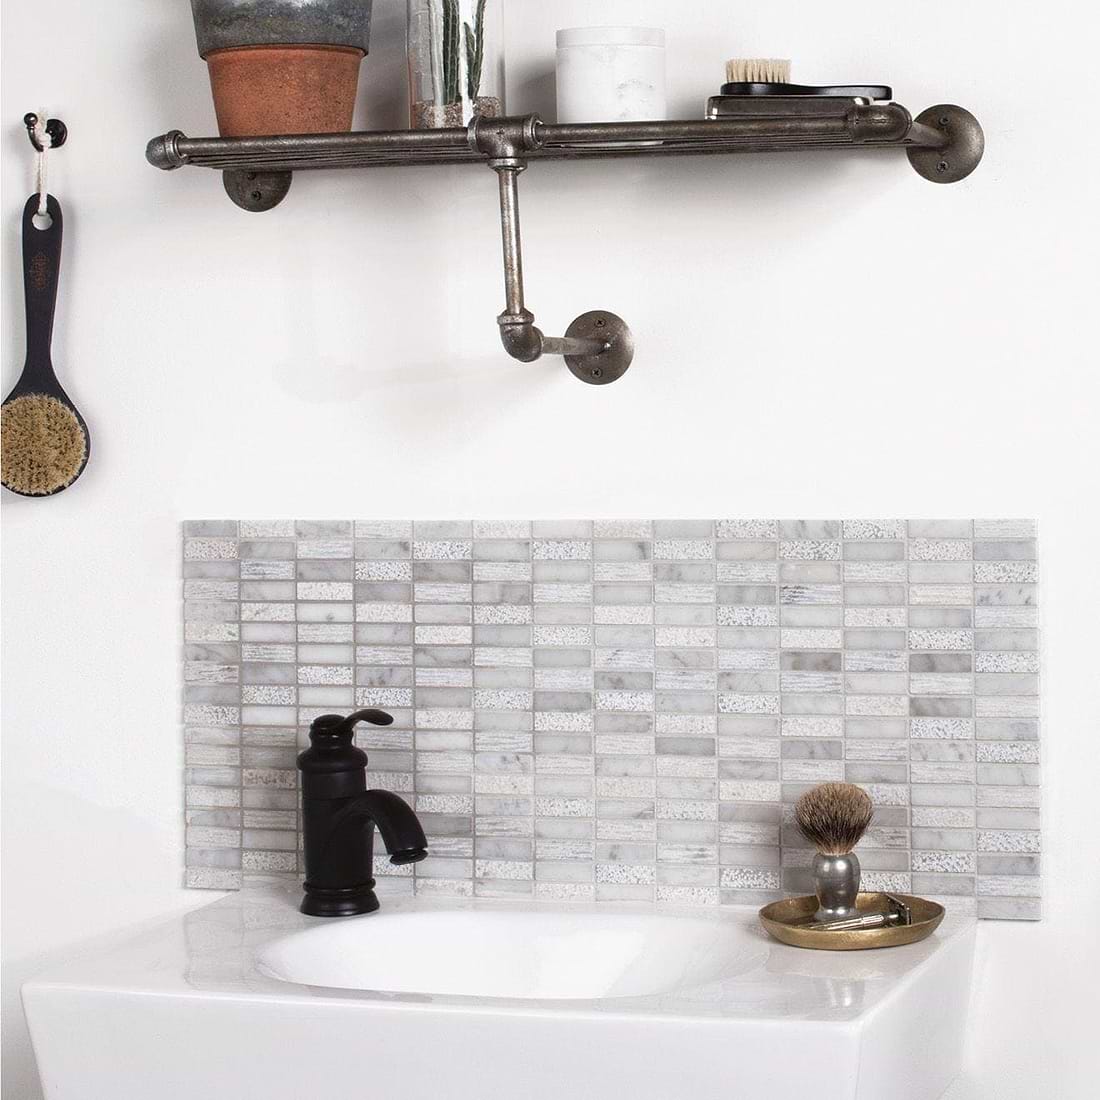 Nares Running Brick Marble Mosaic - Hyperion Tiles